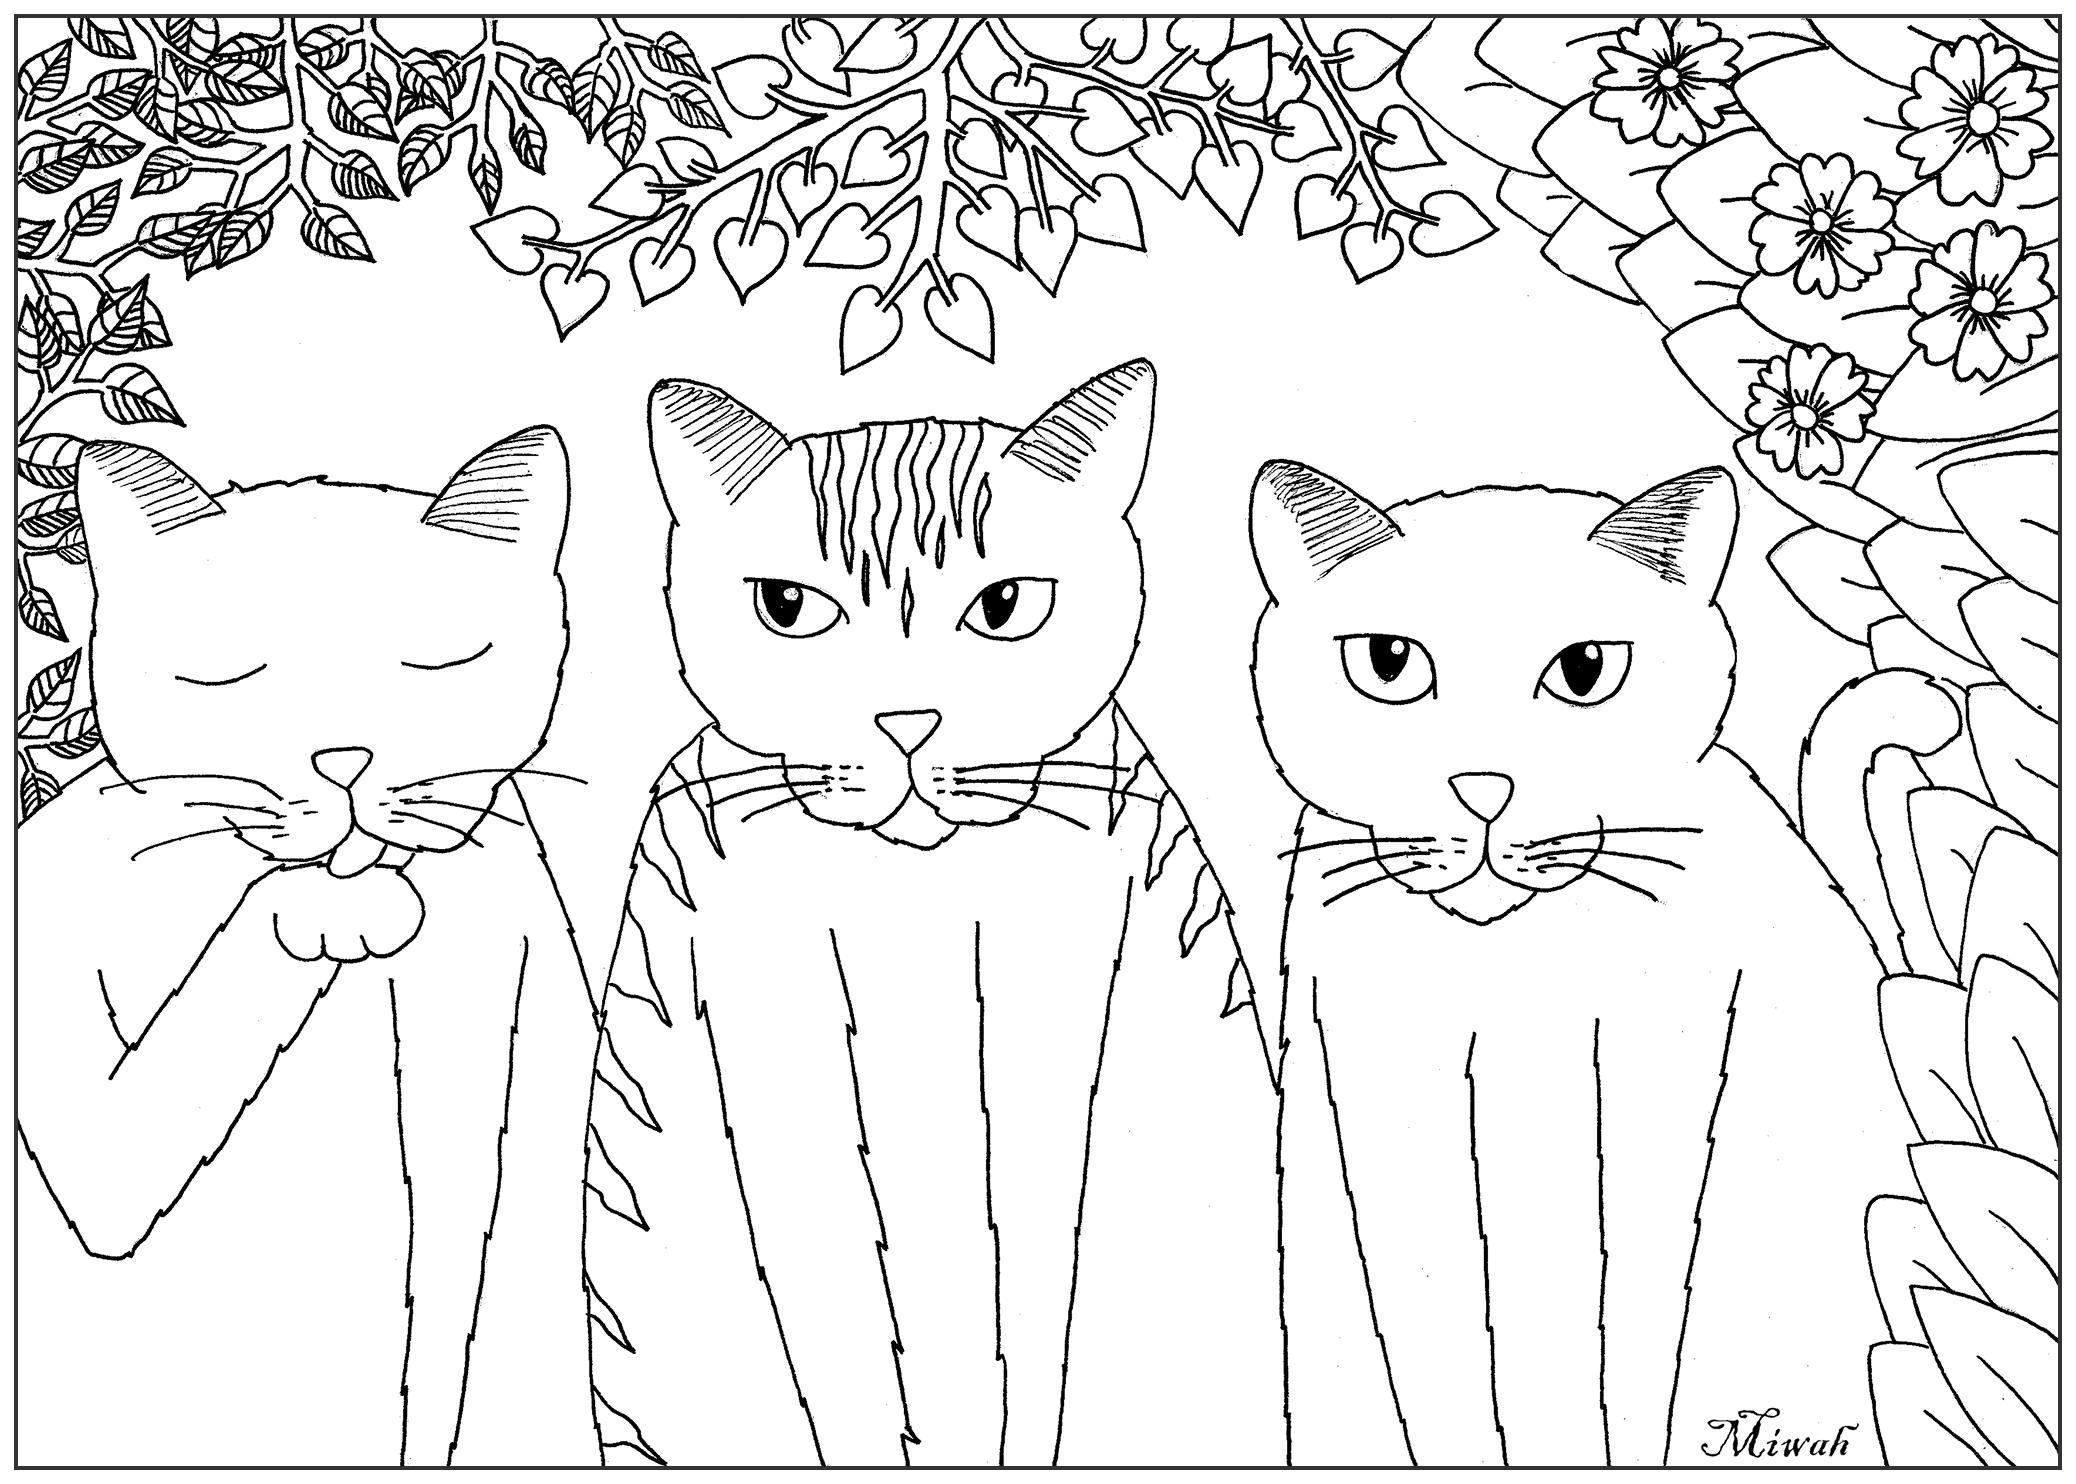 Cat for kids : Three little cats - Cats Kids Coloring Pages